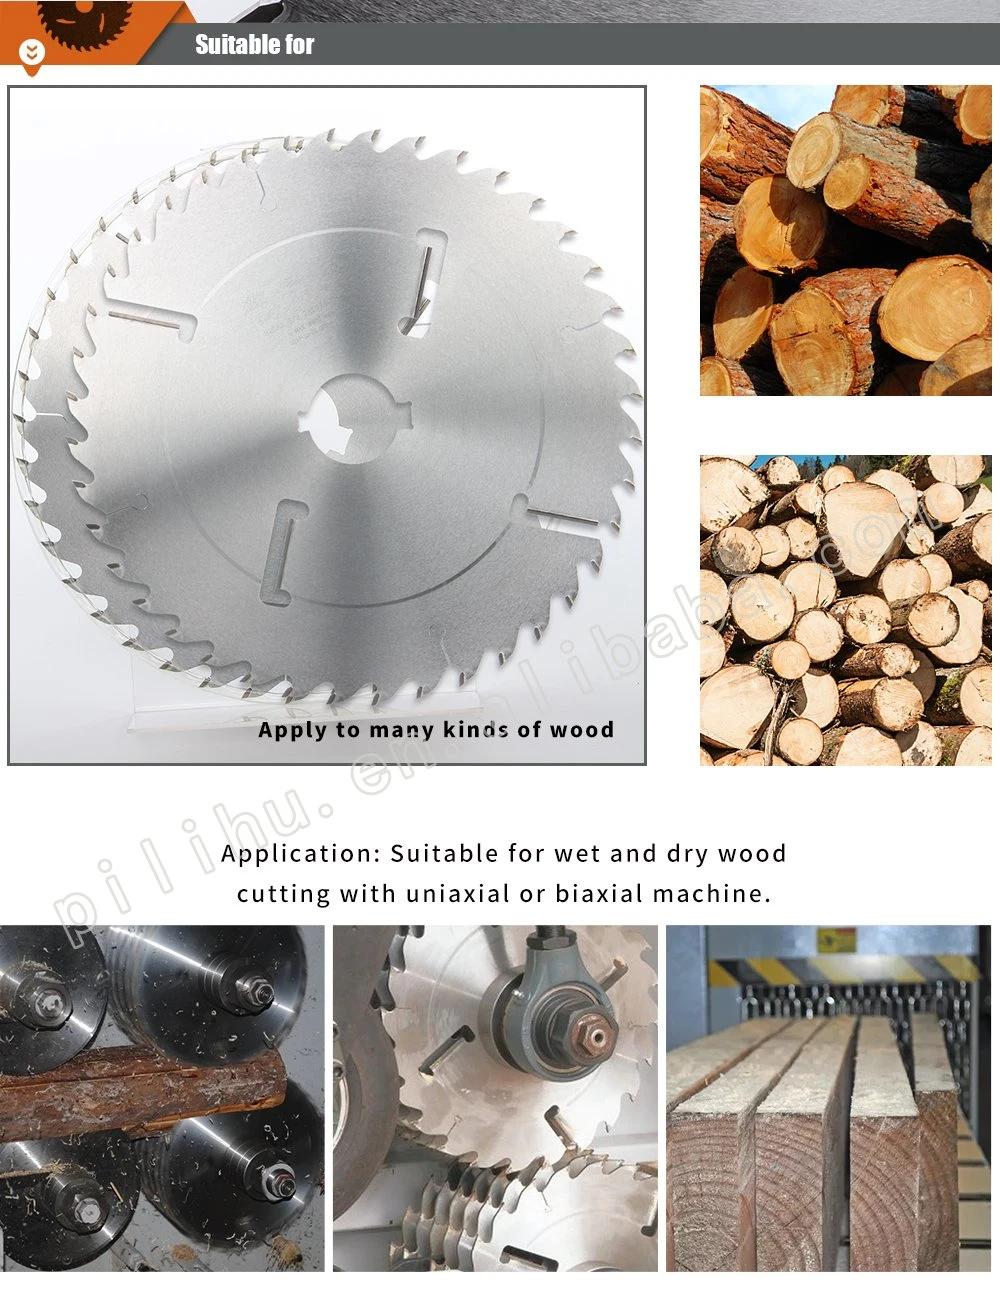 14′′ Tct Circular Multi Saw Blade for Wood Lathe Left and Right Teeth